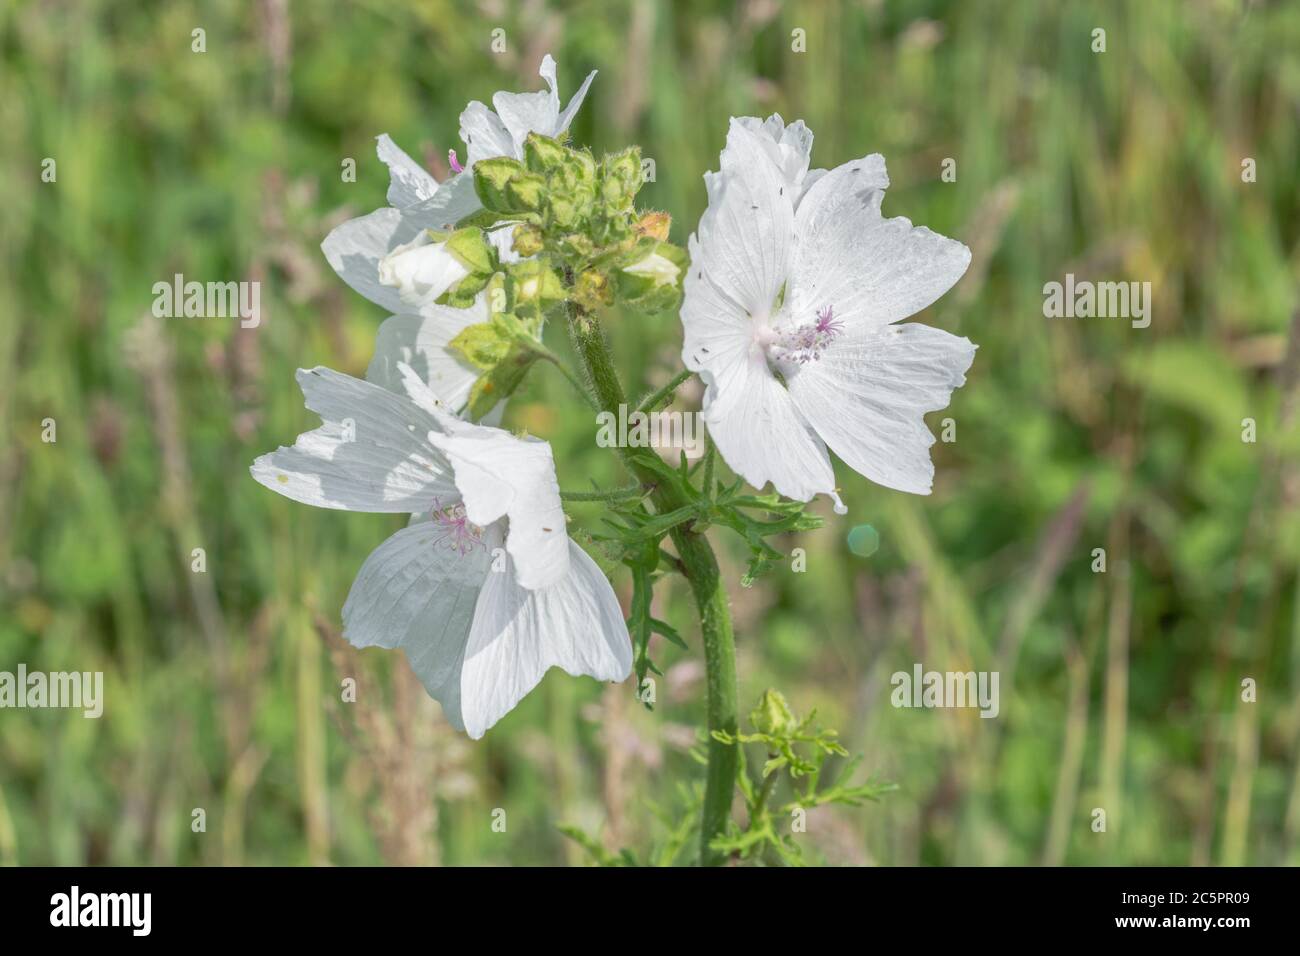 White flower form of Musk Mallow / Malva moschata. Probably variant M. moschata alba rather than true MM. Former medicinal plant used for herbal cures Stock Photo